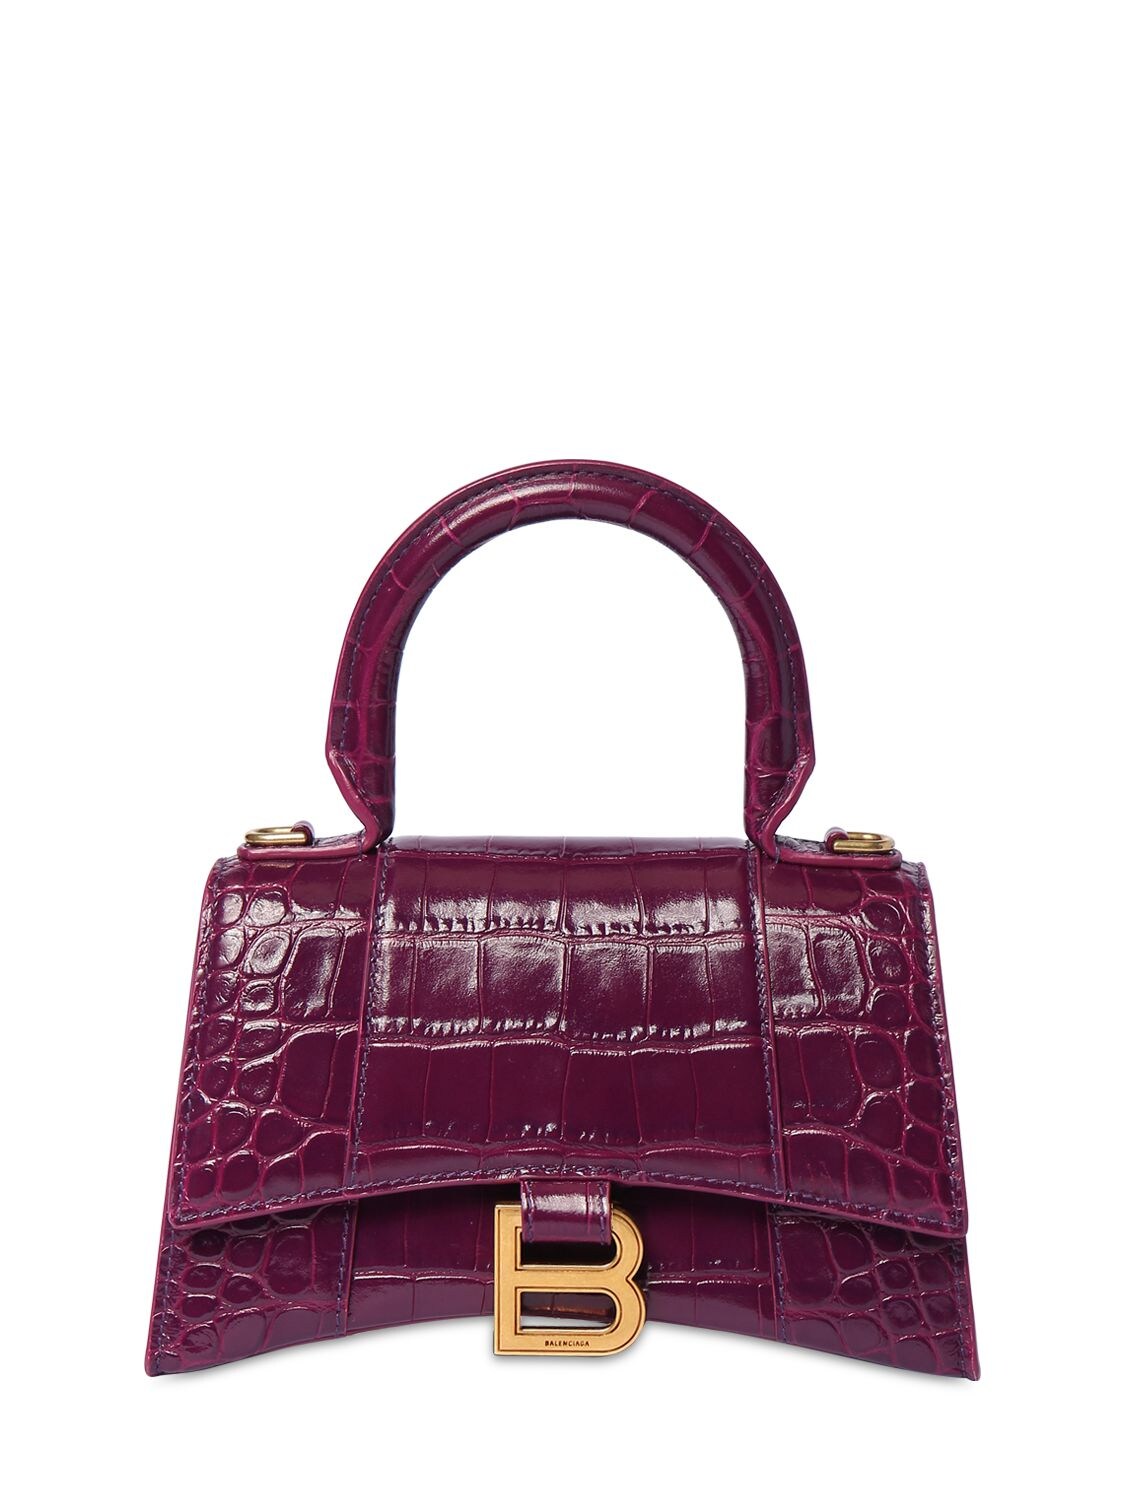 Balenciaga Xs Hourglass Croc Embossed Leather Bag In Grape